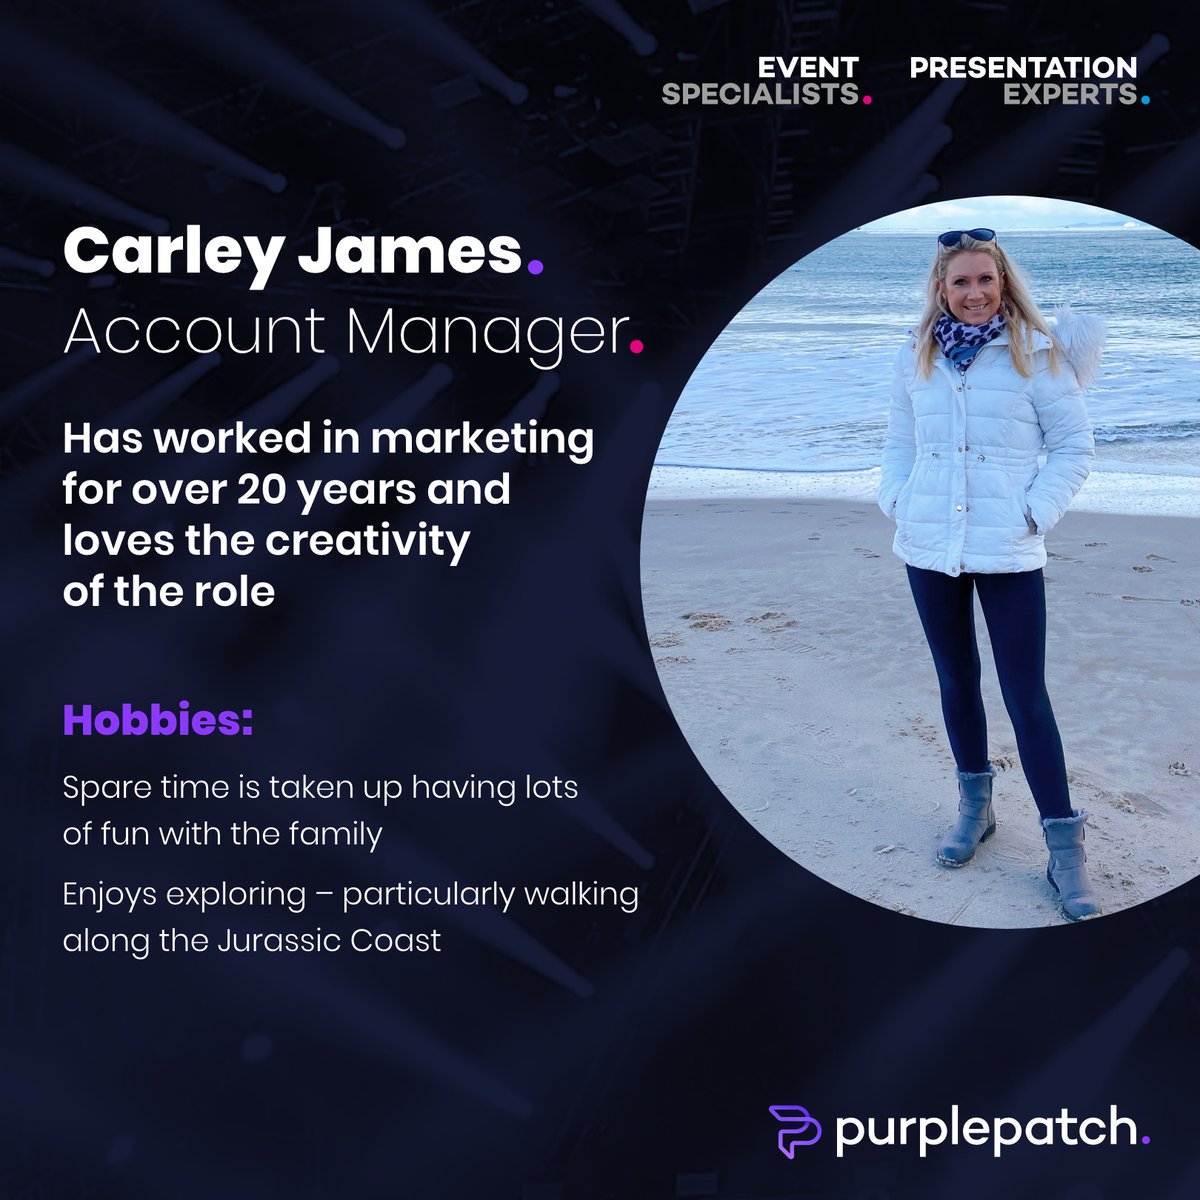 It is meet the team Monday, this week is Account Manager, Carley James who has over 20 years' experience in marketing. linkedin.com/in/carley-jame… #meettheteammonday #meettheteam #team #teamwork #gettoknowus #presentationexperts #purplepatchgroup #powerpointpresentation #powerpoint